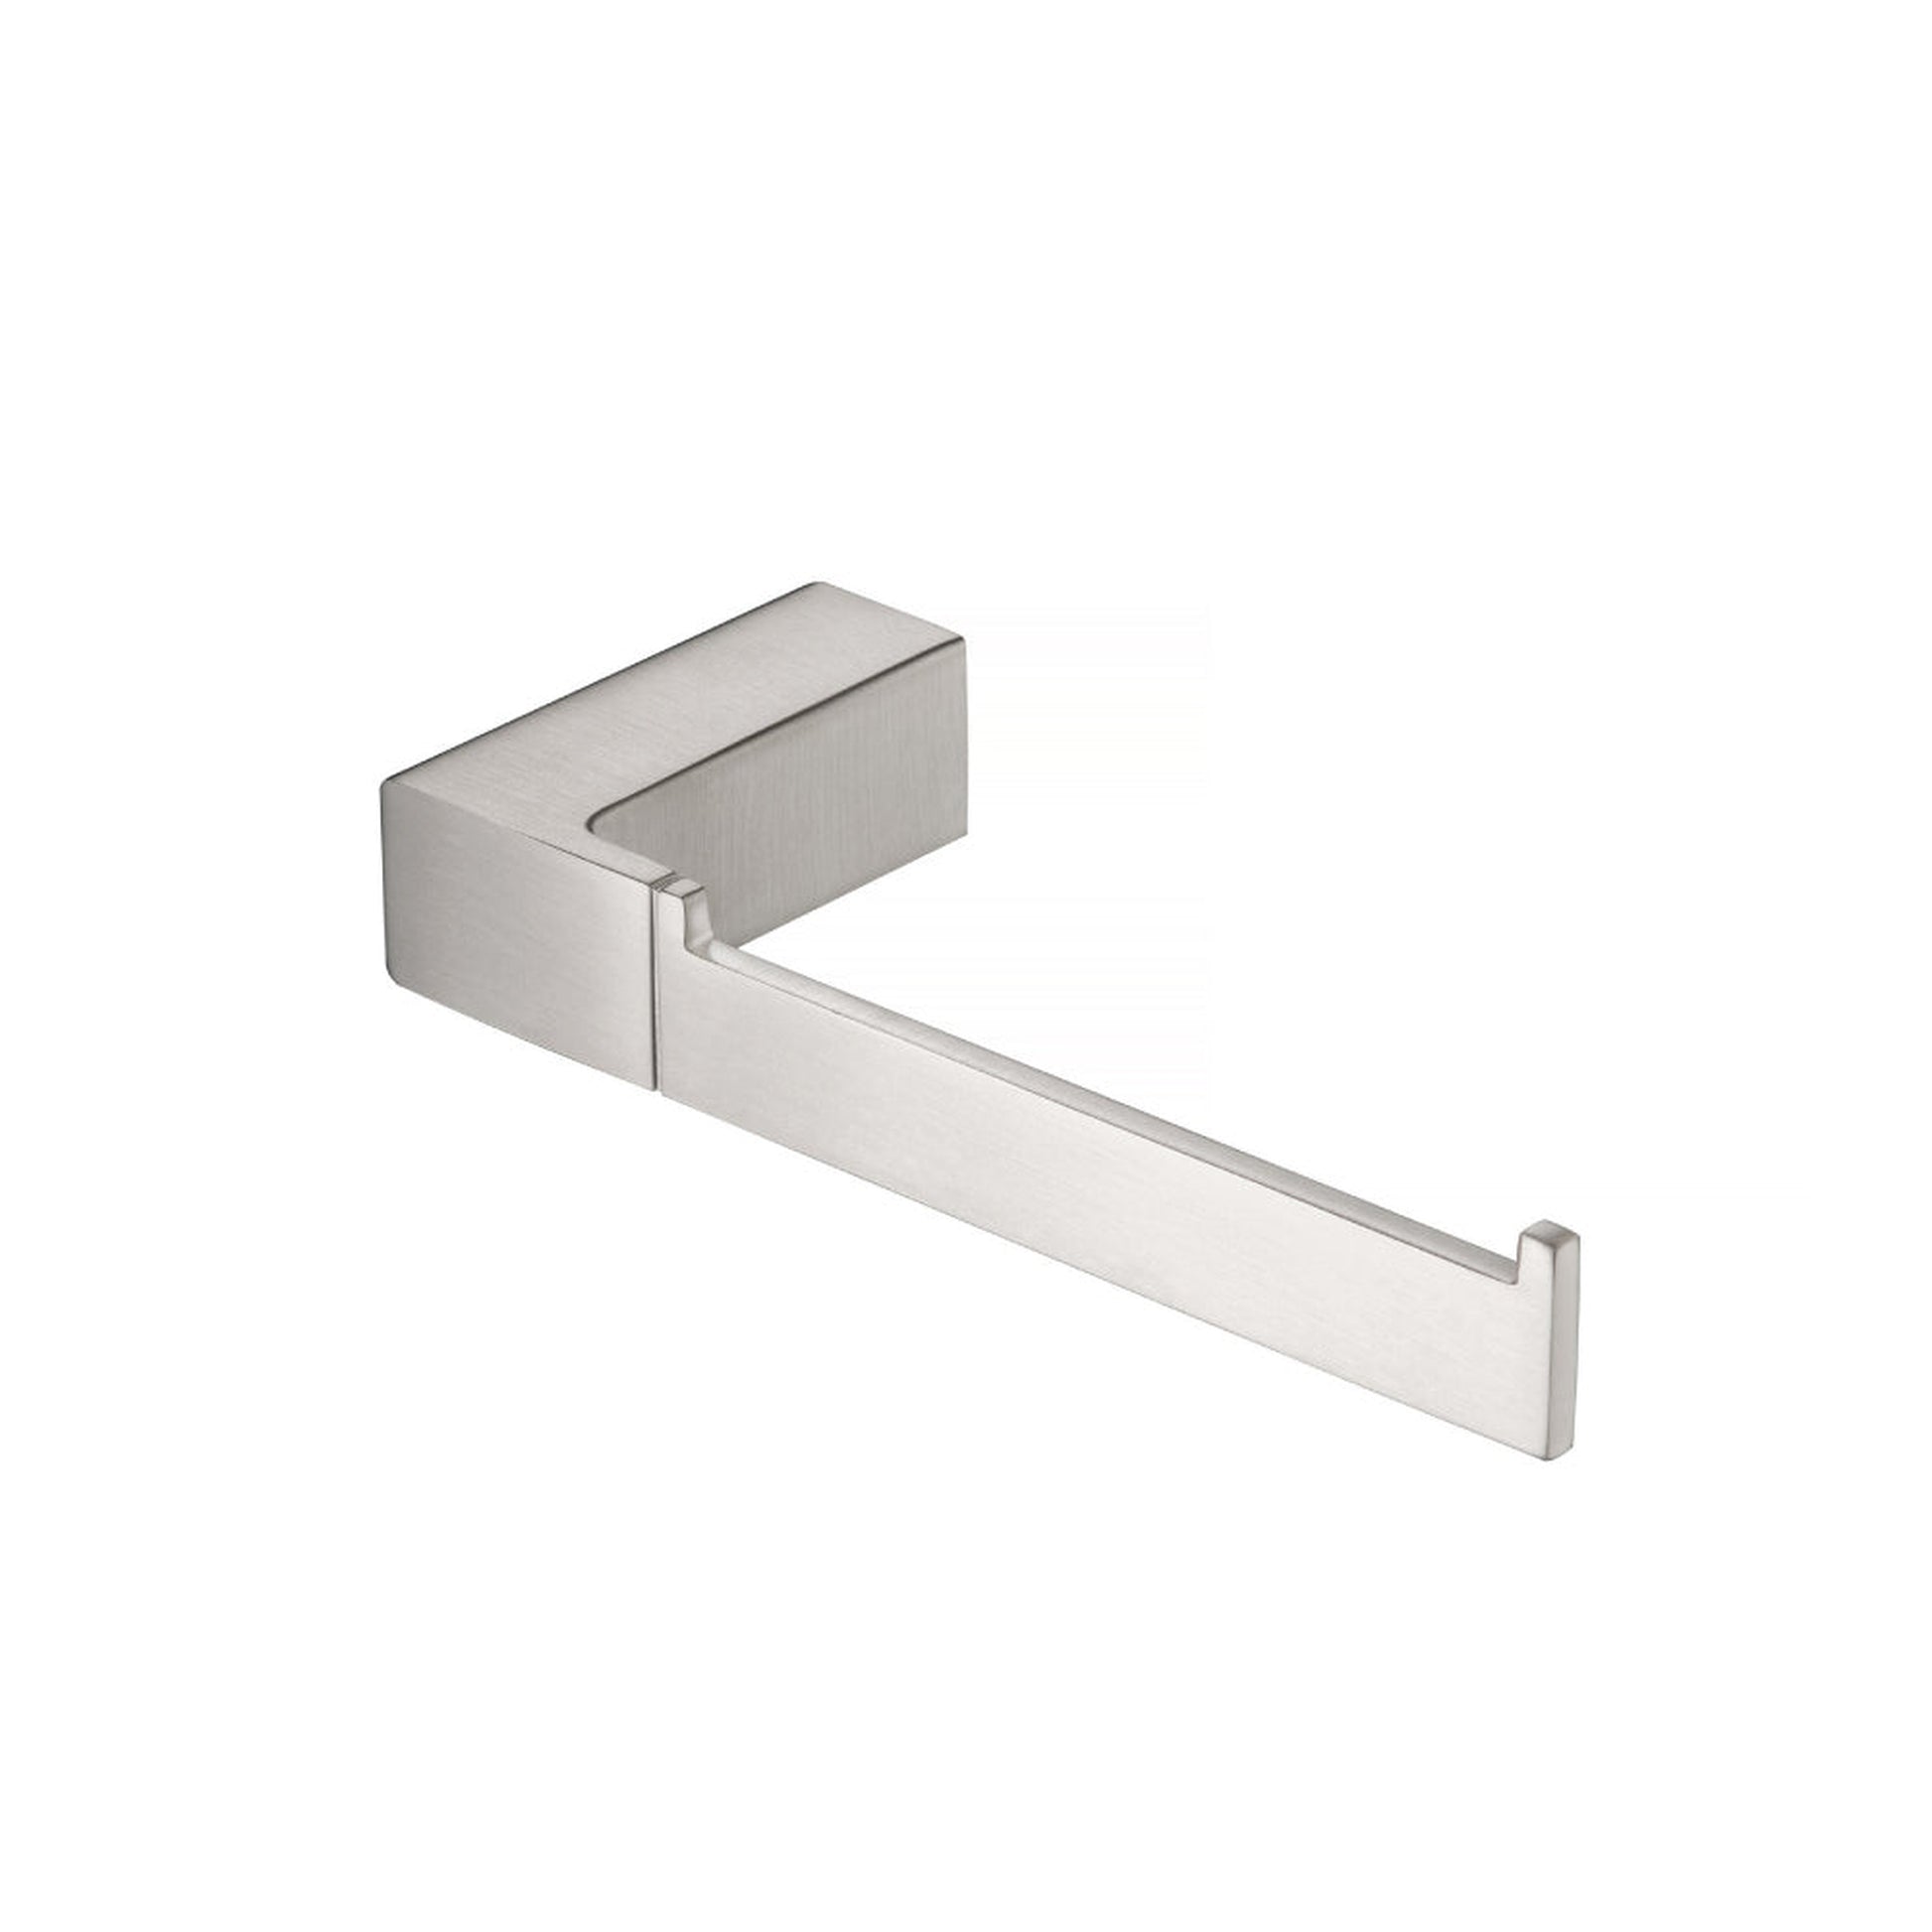 Isenberg Serie 196 Brushed Nickel PVD Solid Brass Wall-Mounted Toilet Paper Holder